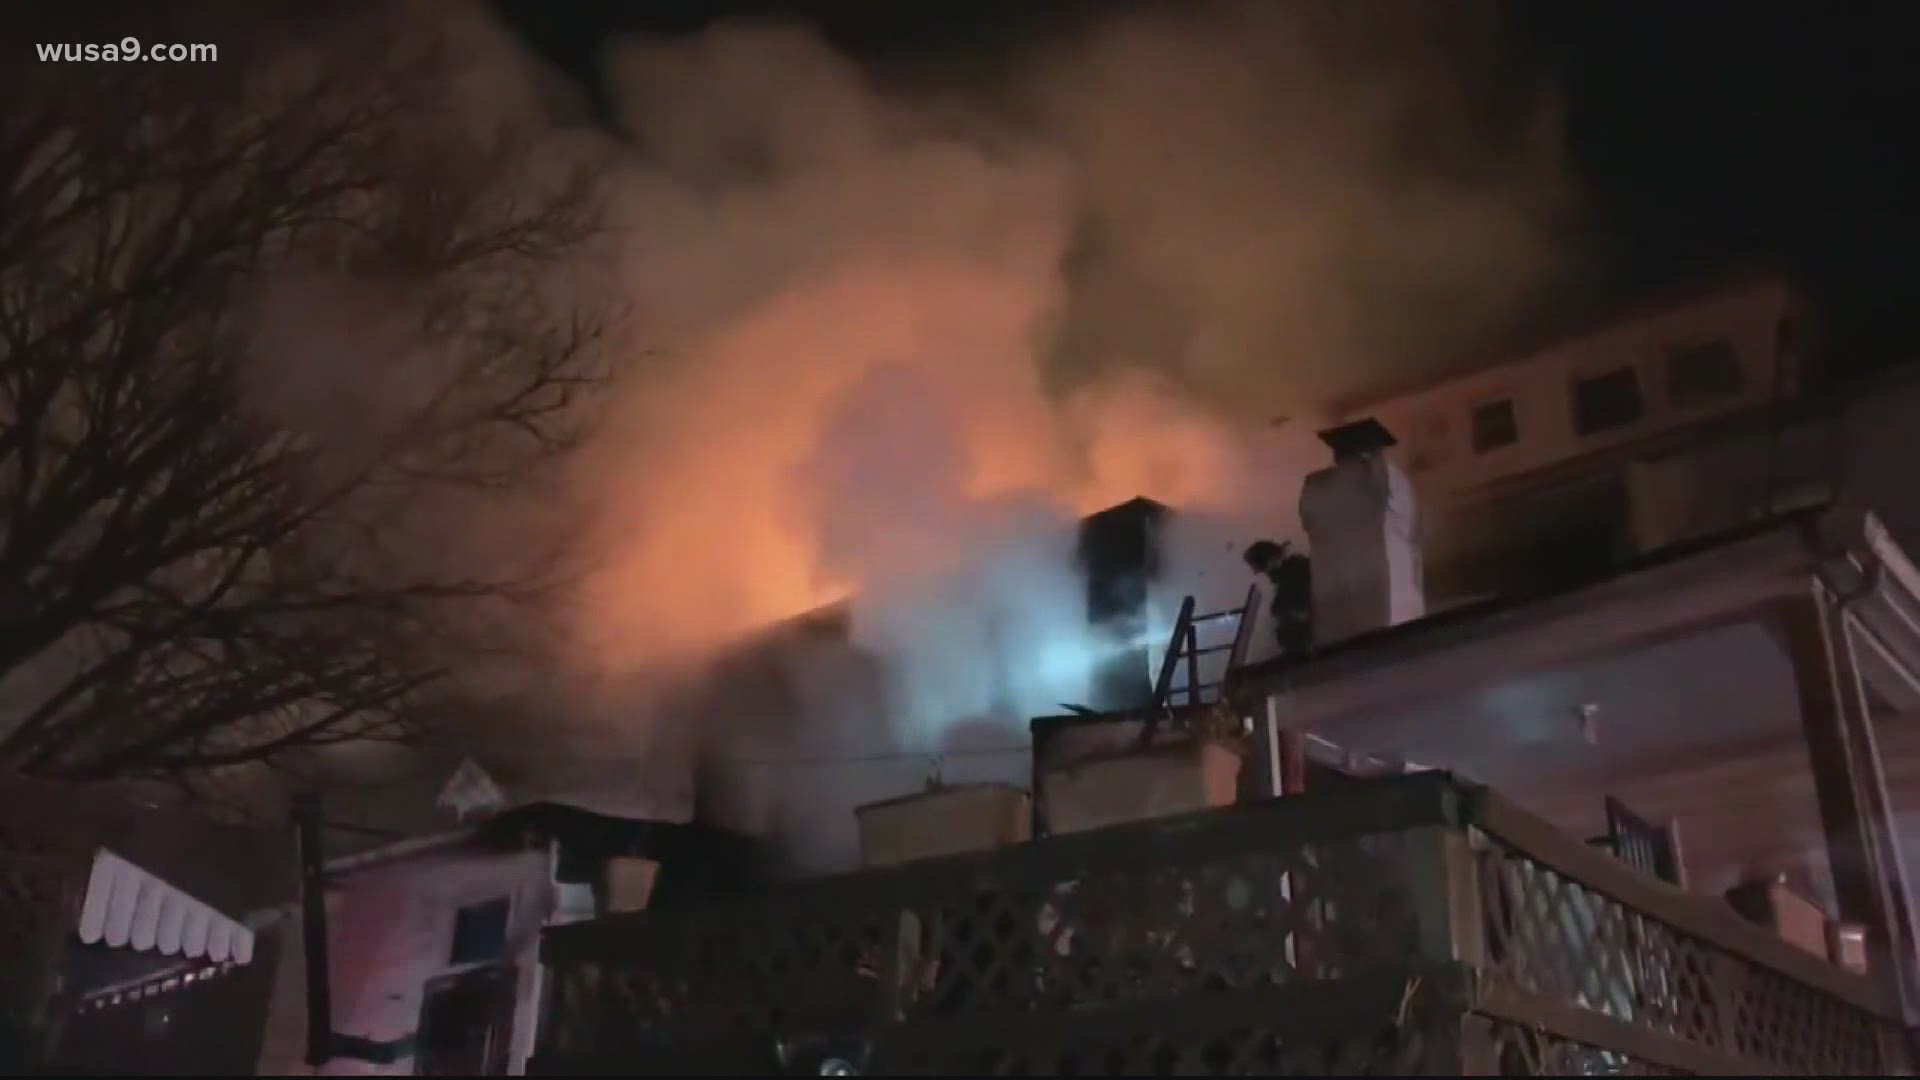 The fire happened at a 2-story row house located in the 4200 block of 8th Street around 3 a.m., officials say.